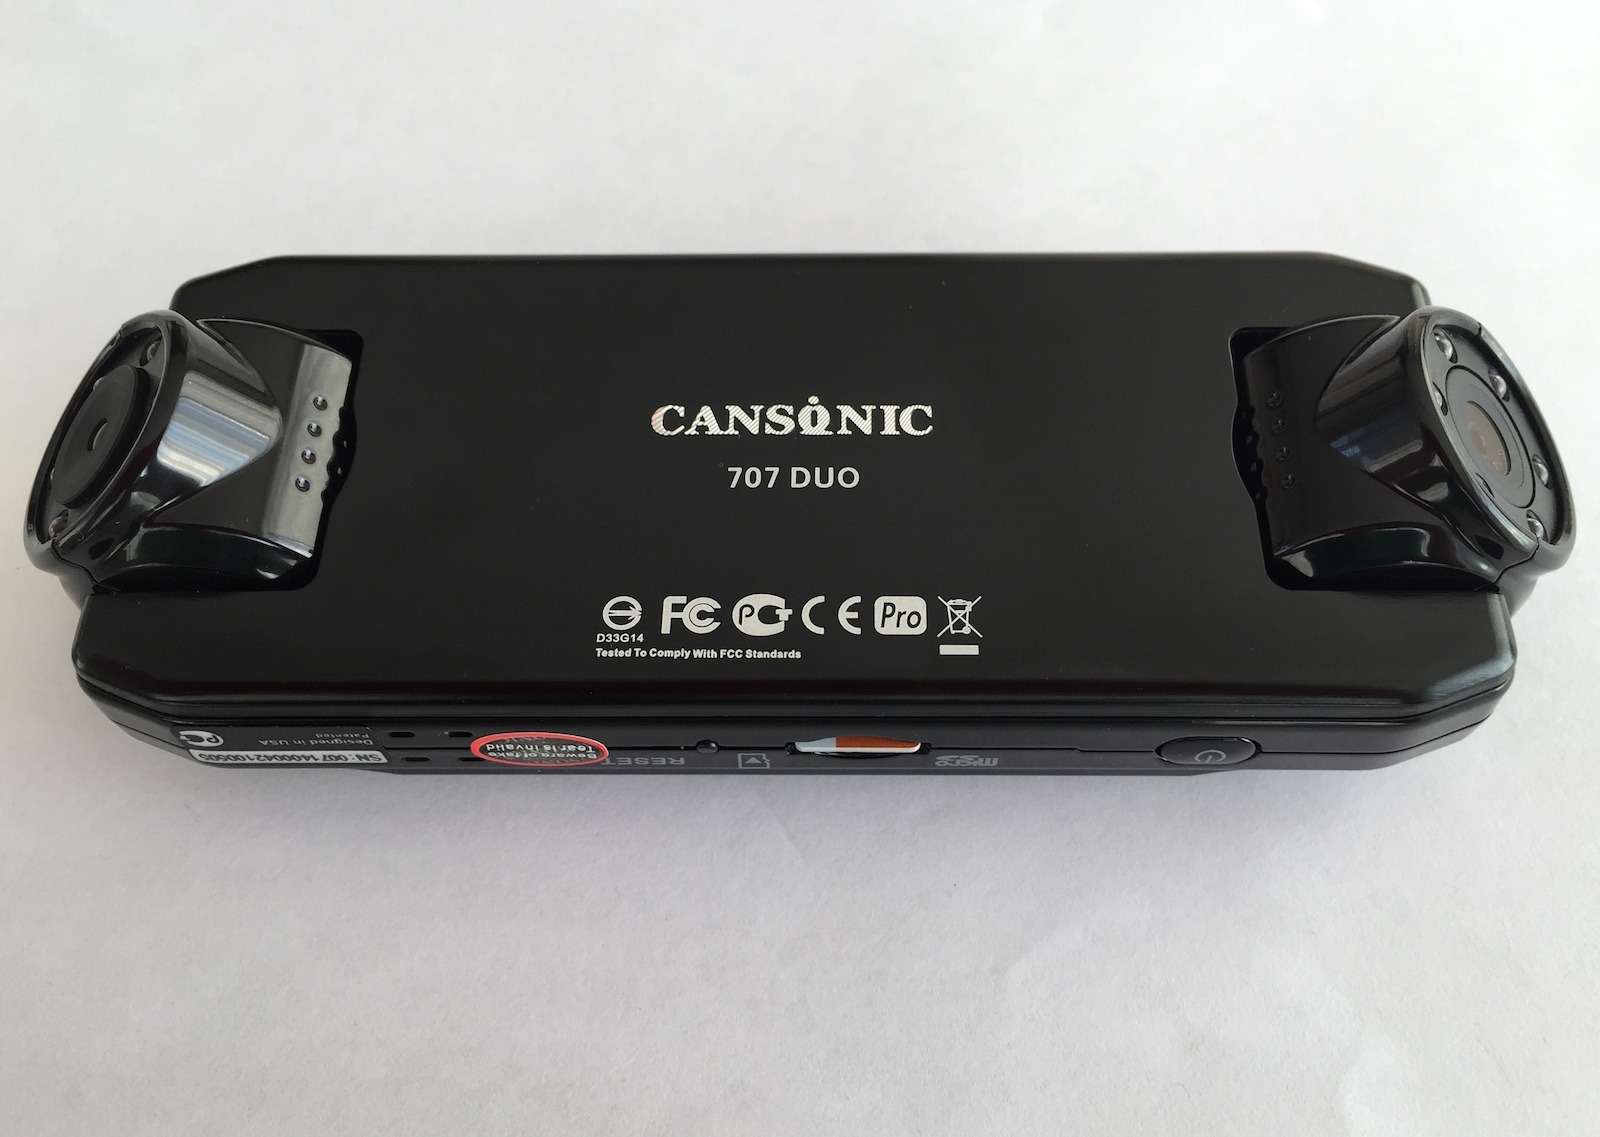 Cansonic 707 Duo Pro